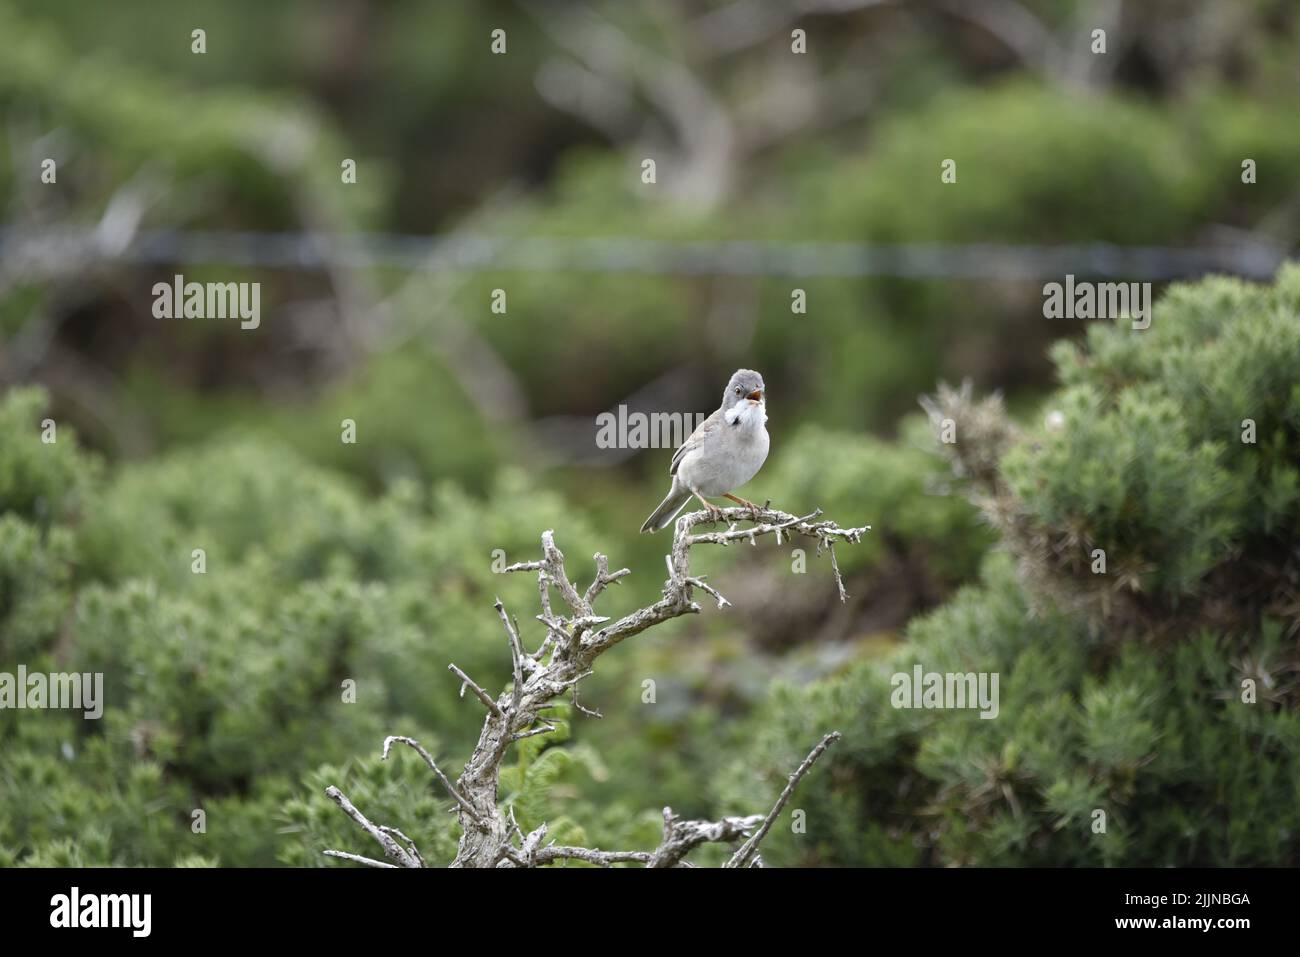 Facing Image of a Whitethroat (Sylvia communis) Singing From a Bare Twig Perch against a Green Foliage Background on the Isle of Man, UK in June Stock Photo